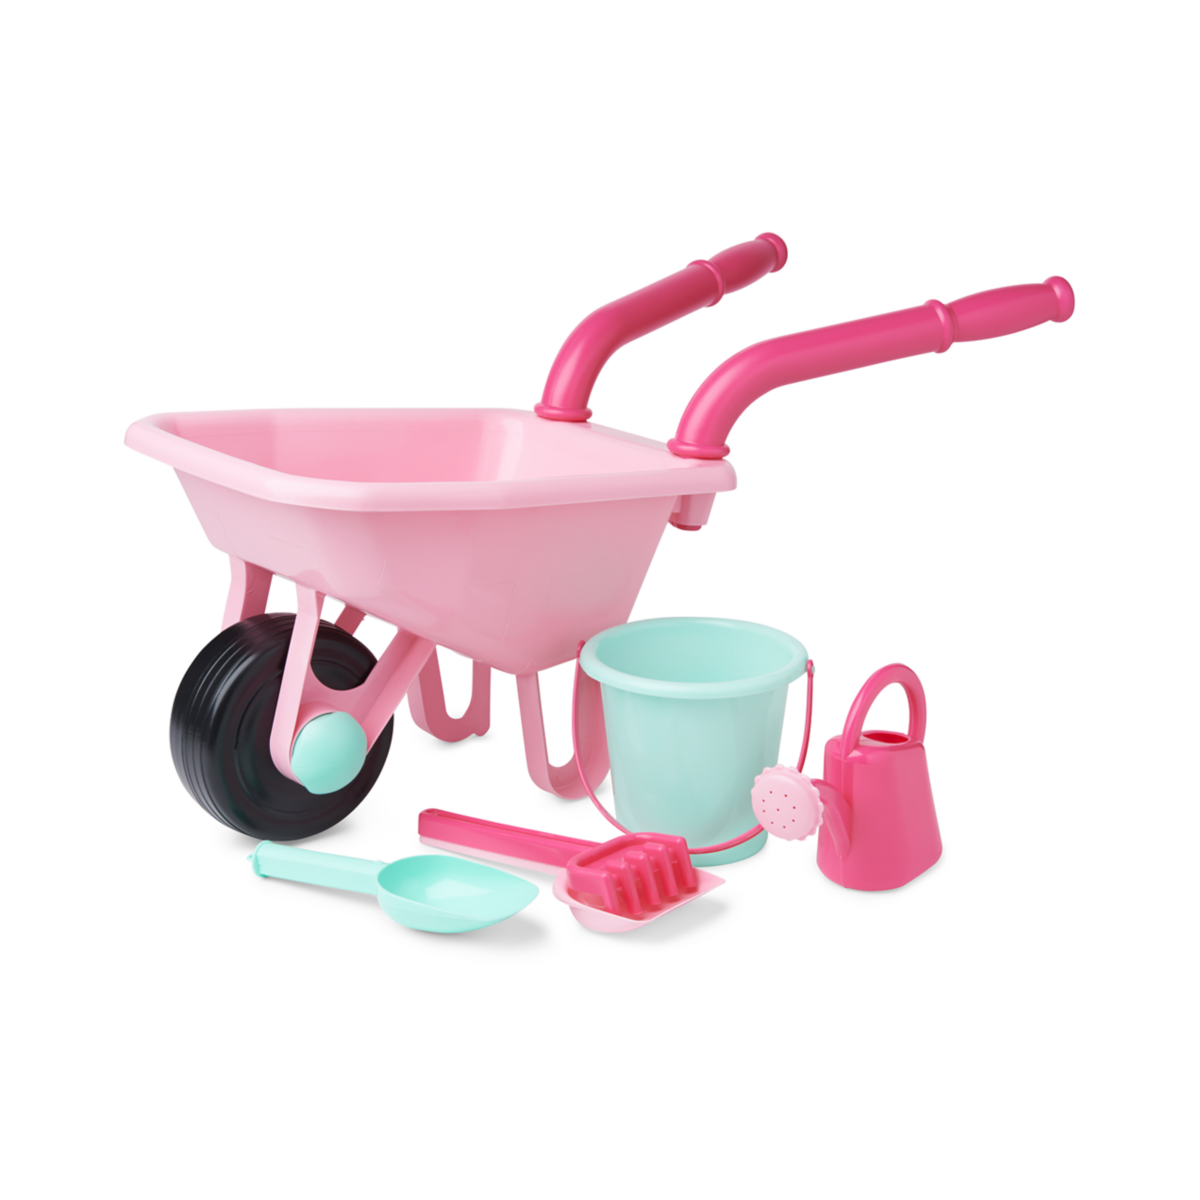 Early Learning Centre Wheelbarrow Set - Pink | Early Learning Centre